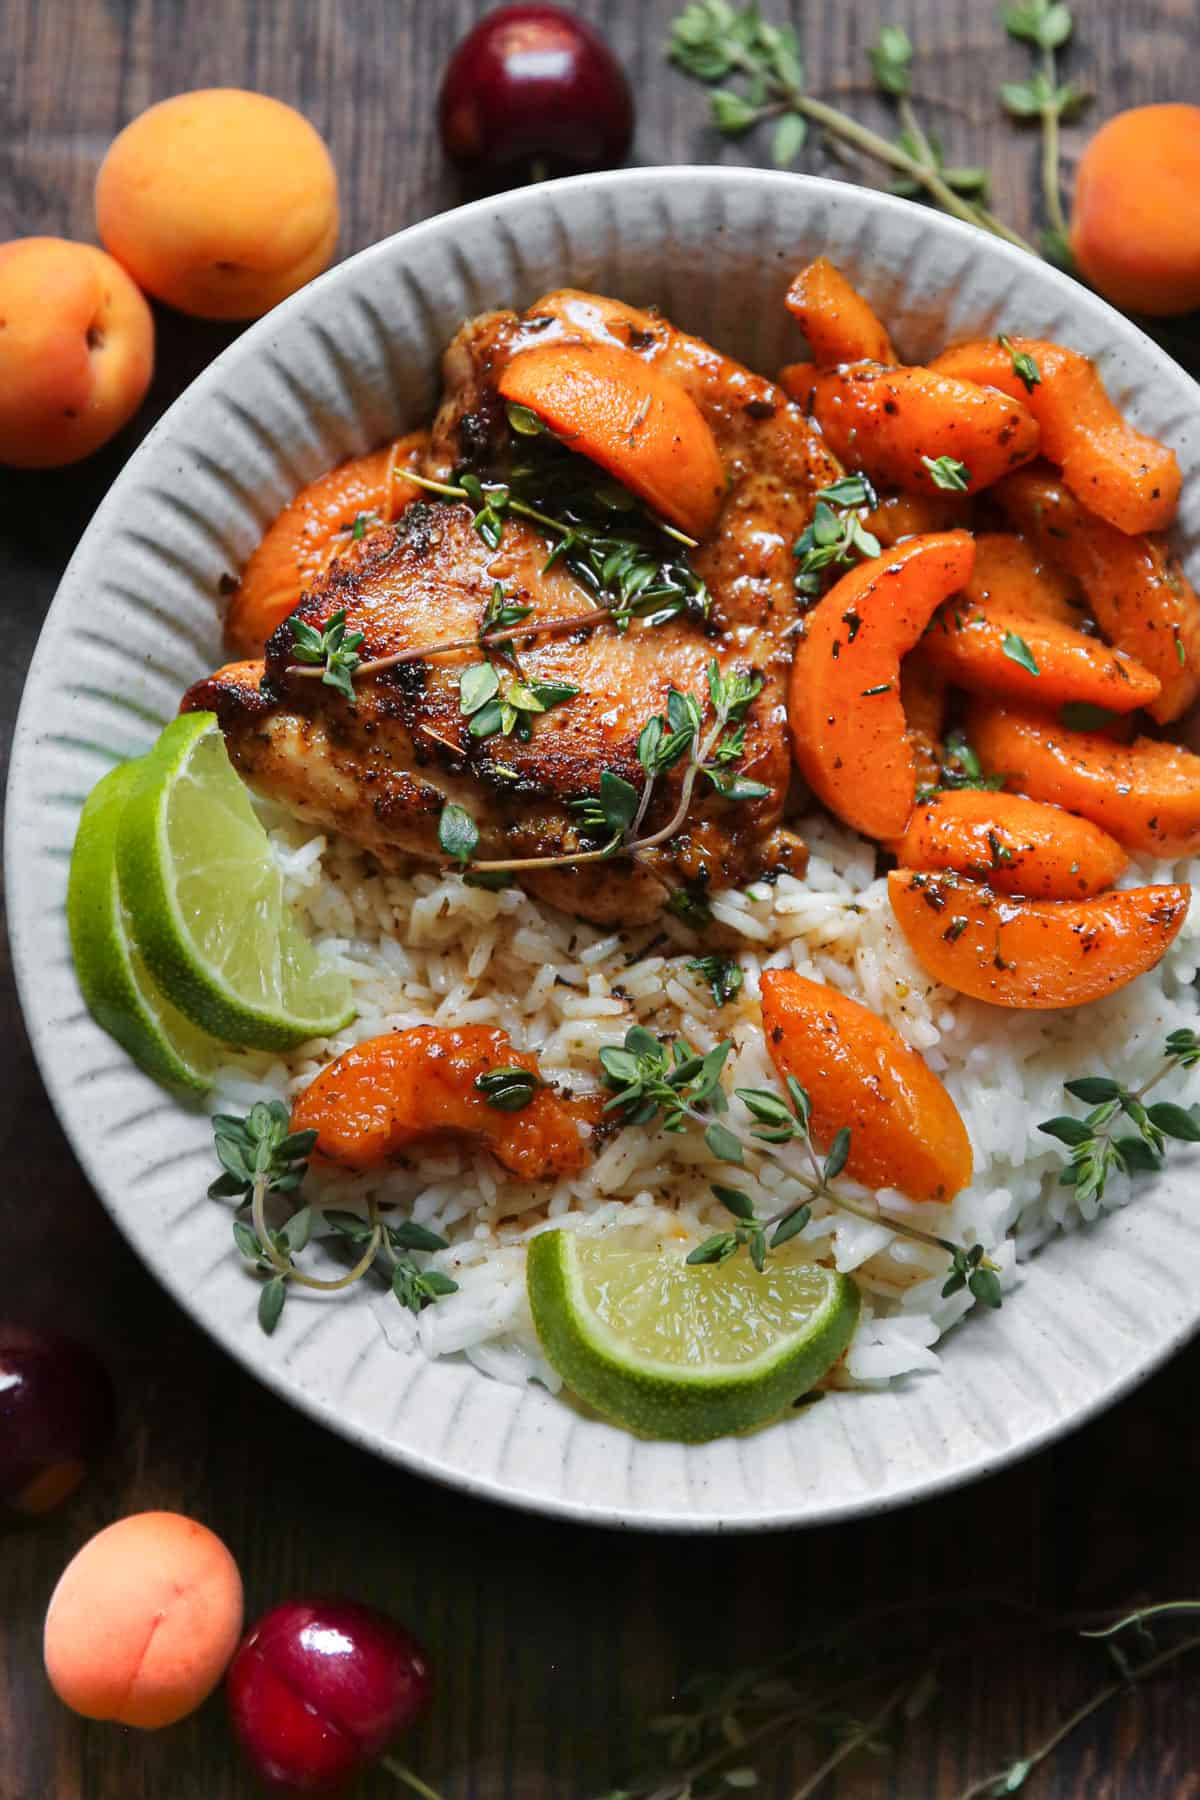 Chicken with cooked sliced Apricots, Honey-Lime Sauce, white rice, garnished with lime slices - on a white plate.